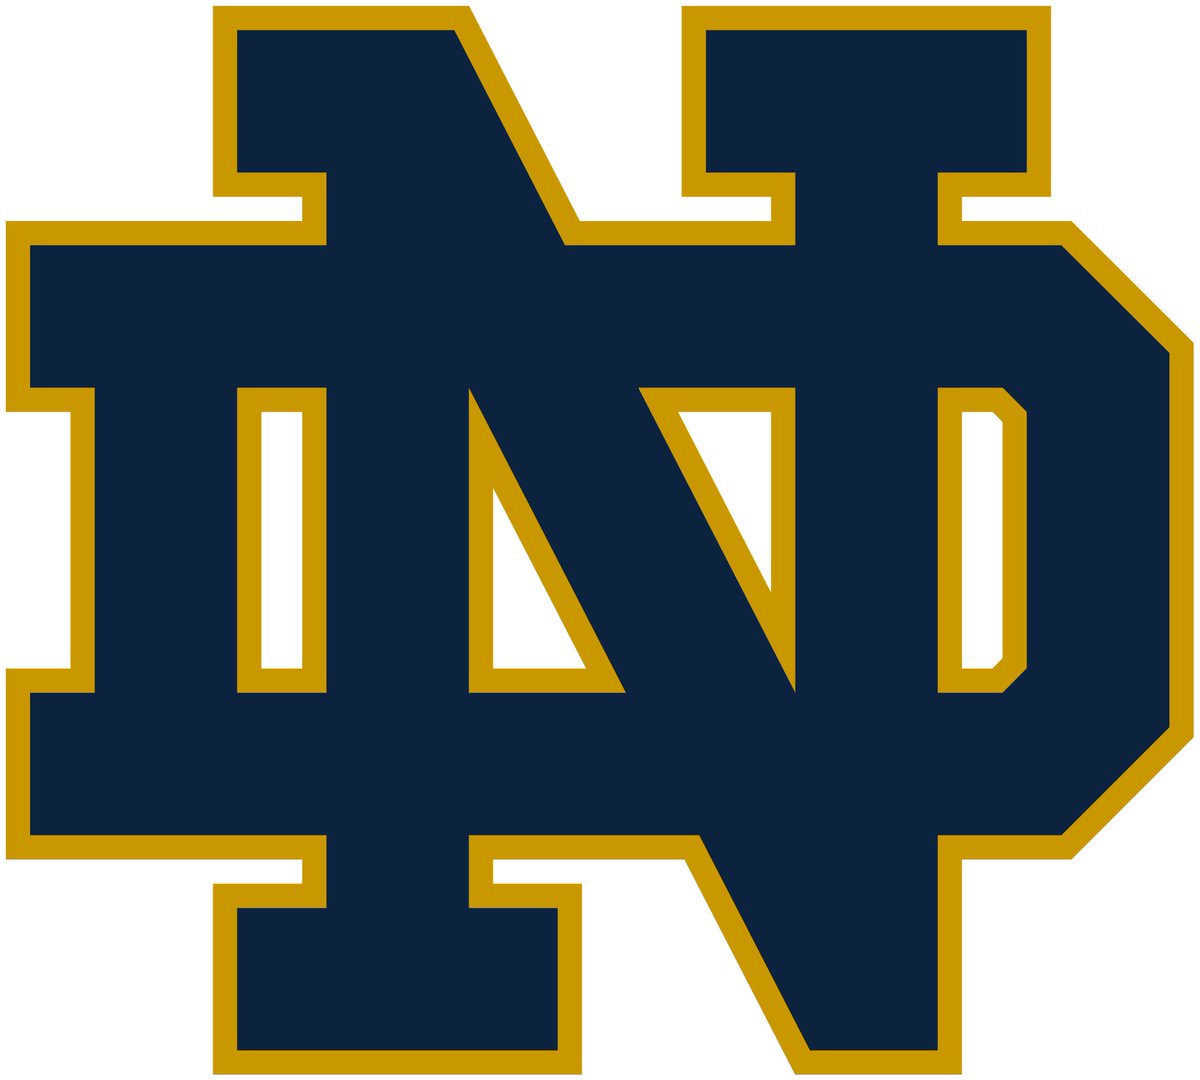 Extremely blessed to receive an offer from the University of Notre Dame!! @NDmbb @PVIHoops